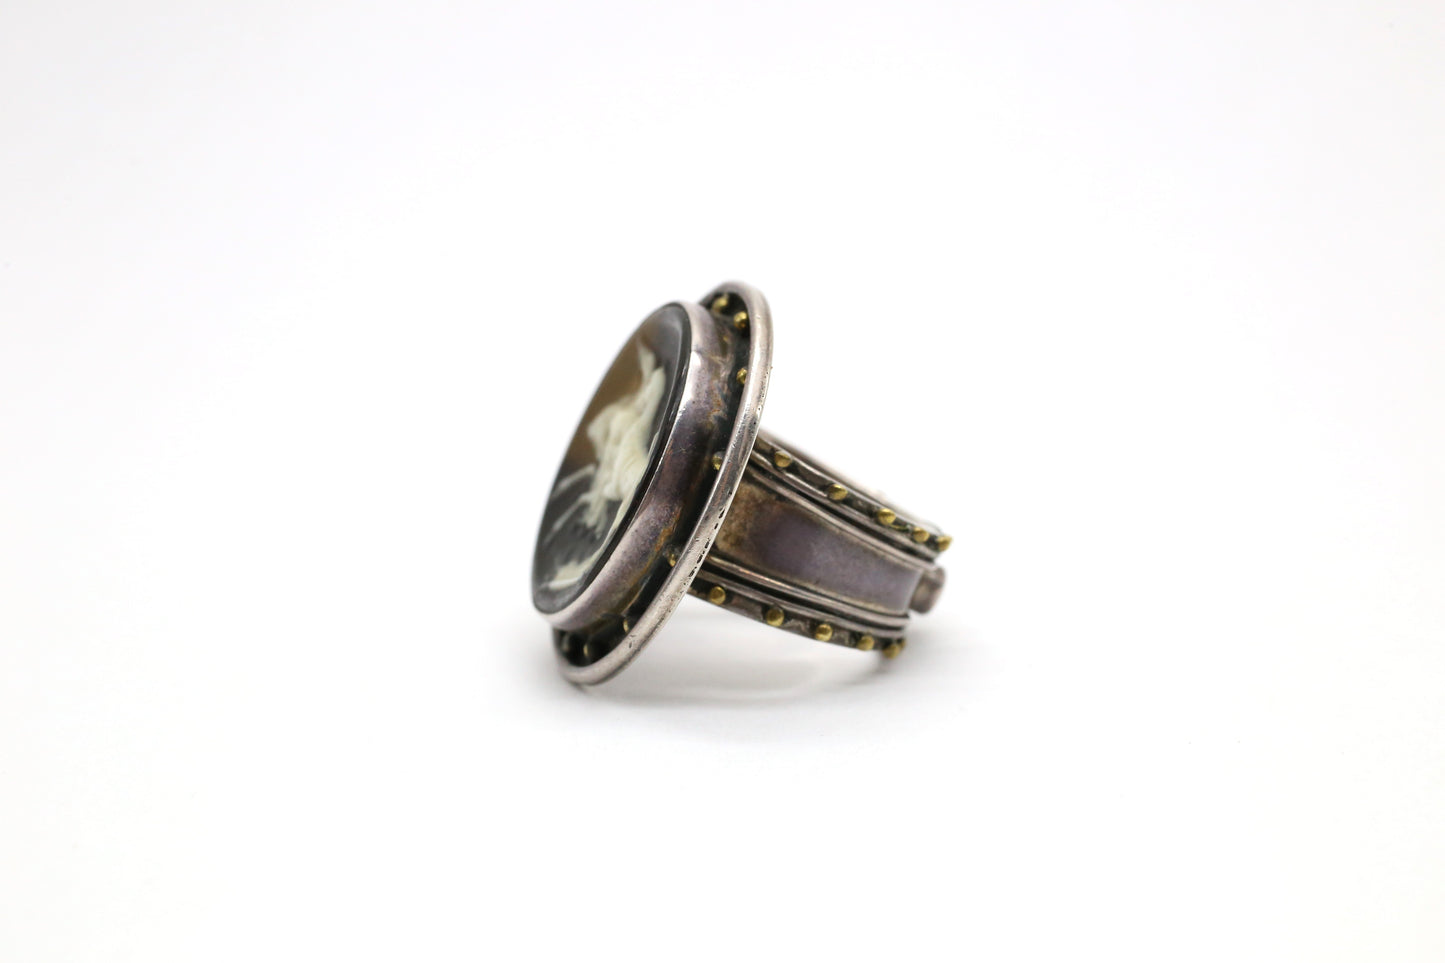 Vintage Sterling Silver Intaglio Ring, Size 7 - 16.7g